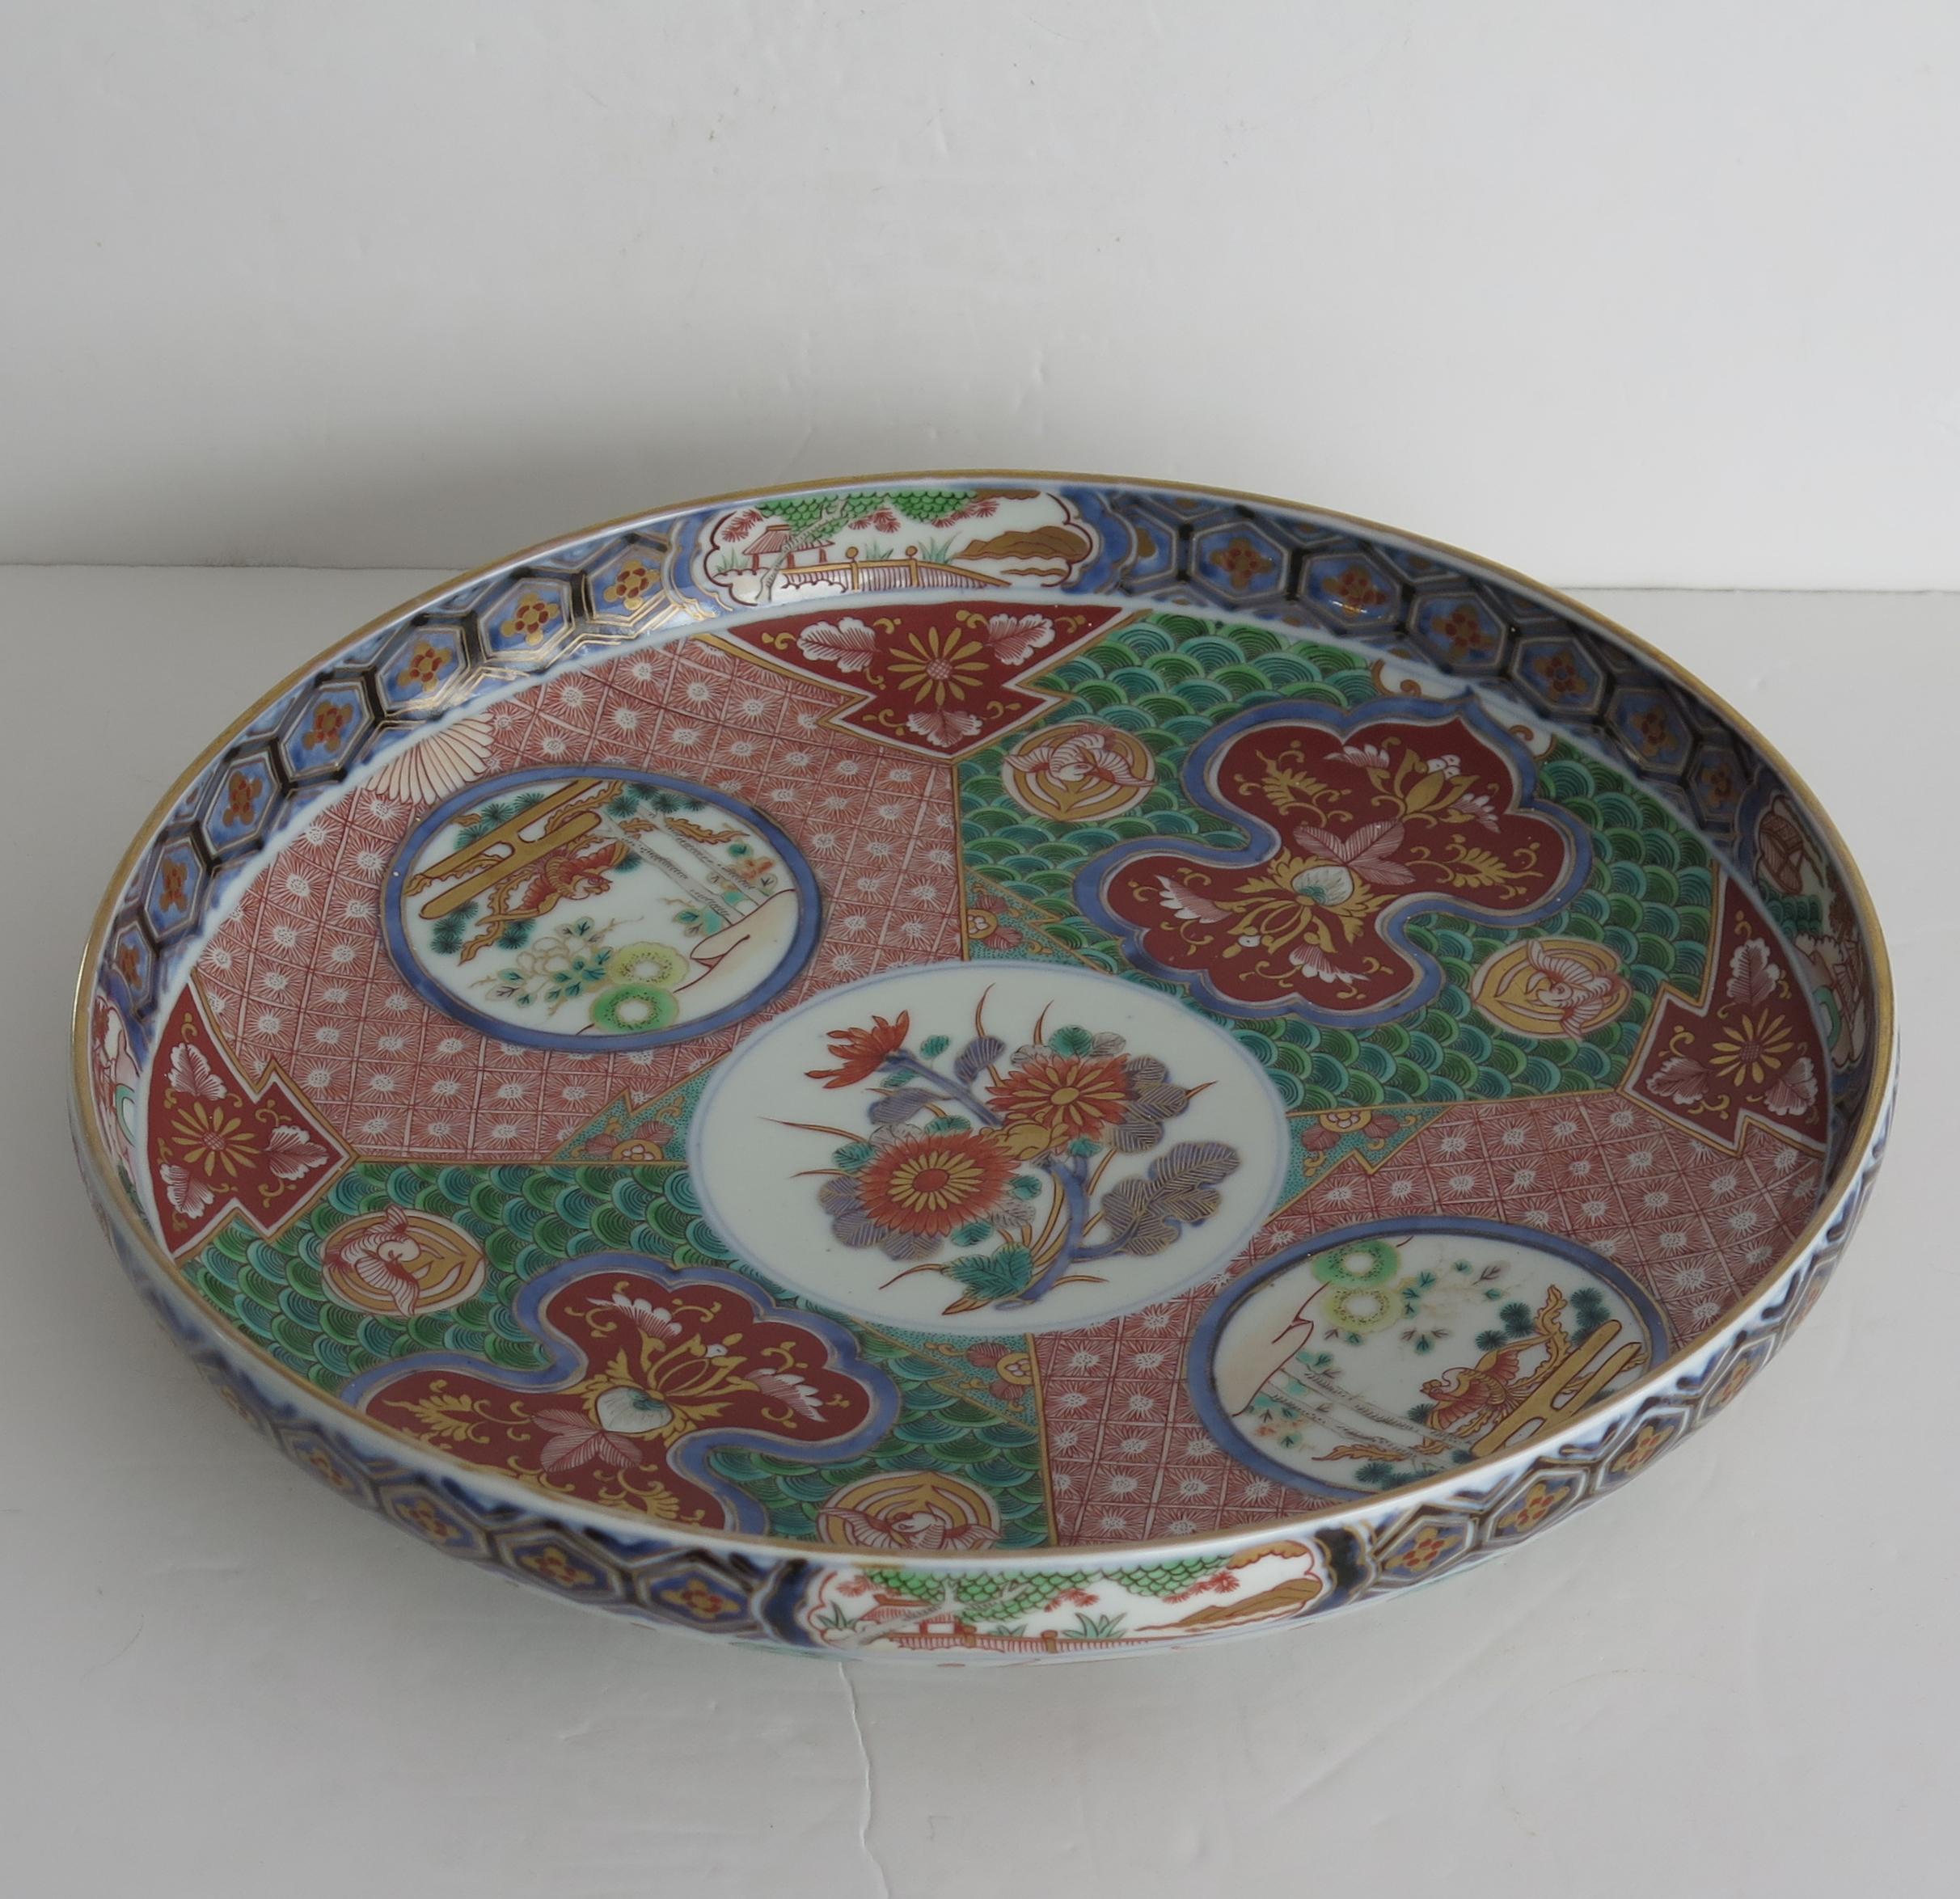 This is a very beautiful example of a Japanese, Arita- Imari porcelain ceramic large Dish or Plate with finely hand painted decoration, dating to the Edo period circa 1810.

This dish is very finely hand painted in great detail, decorated inside